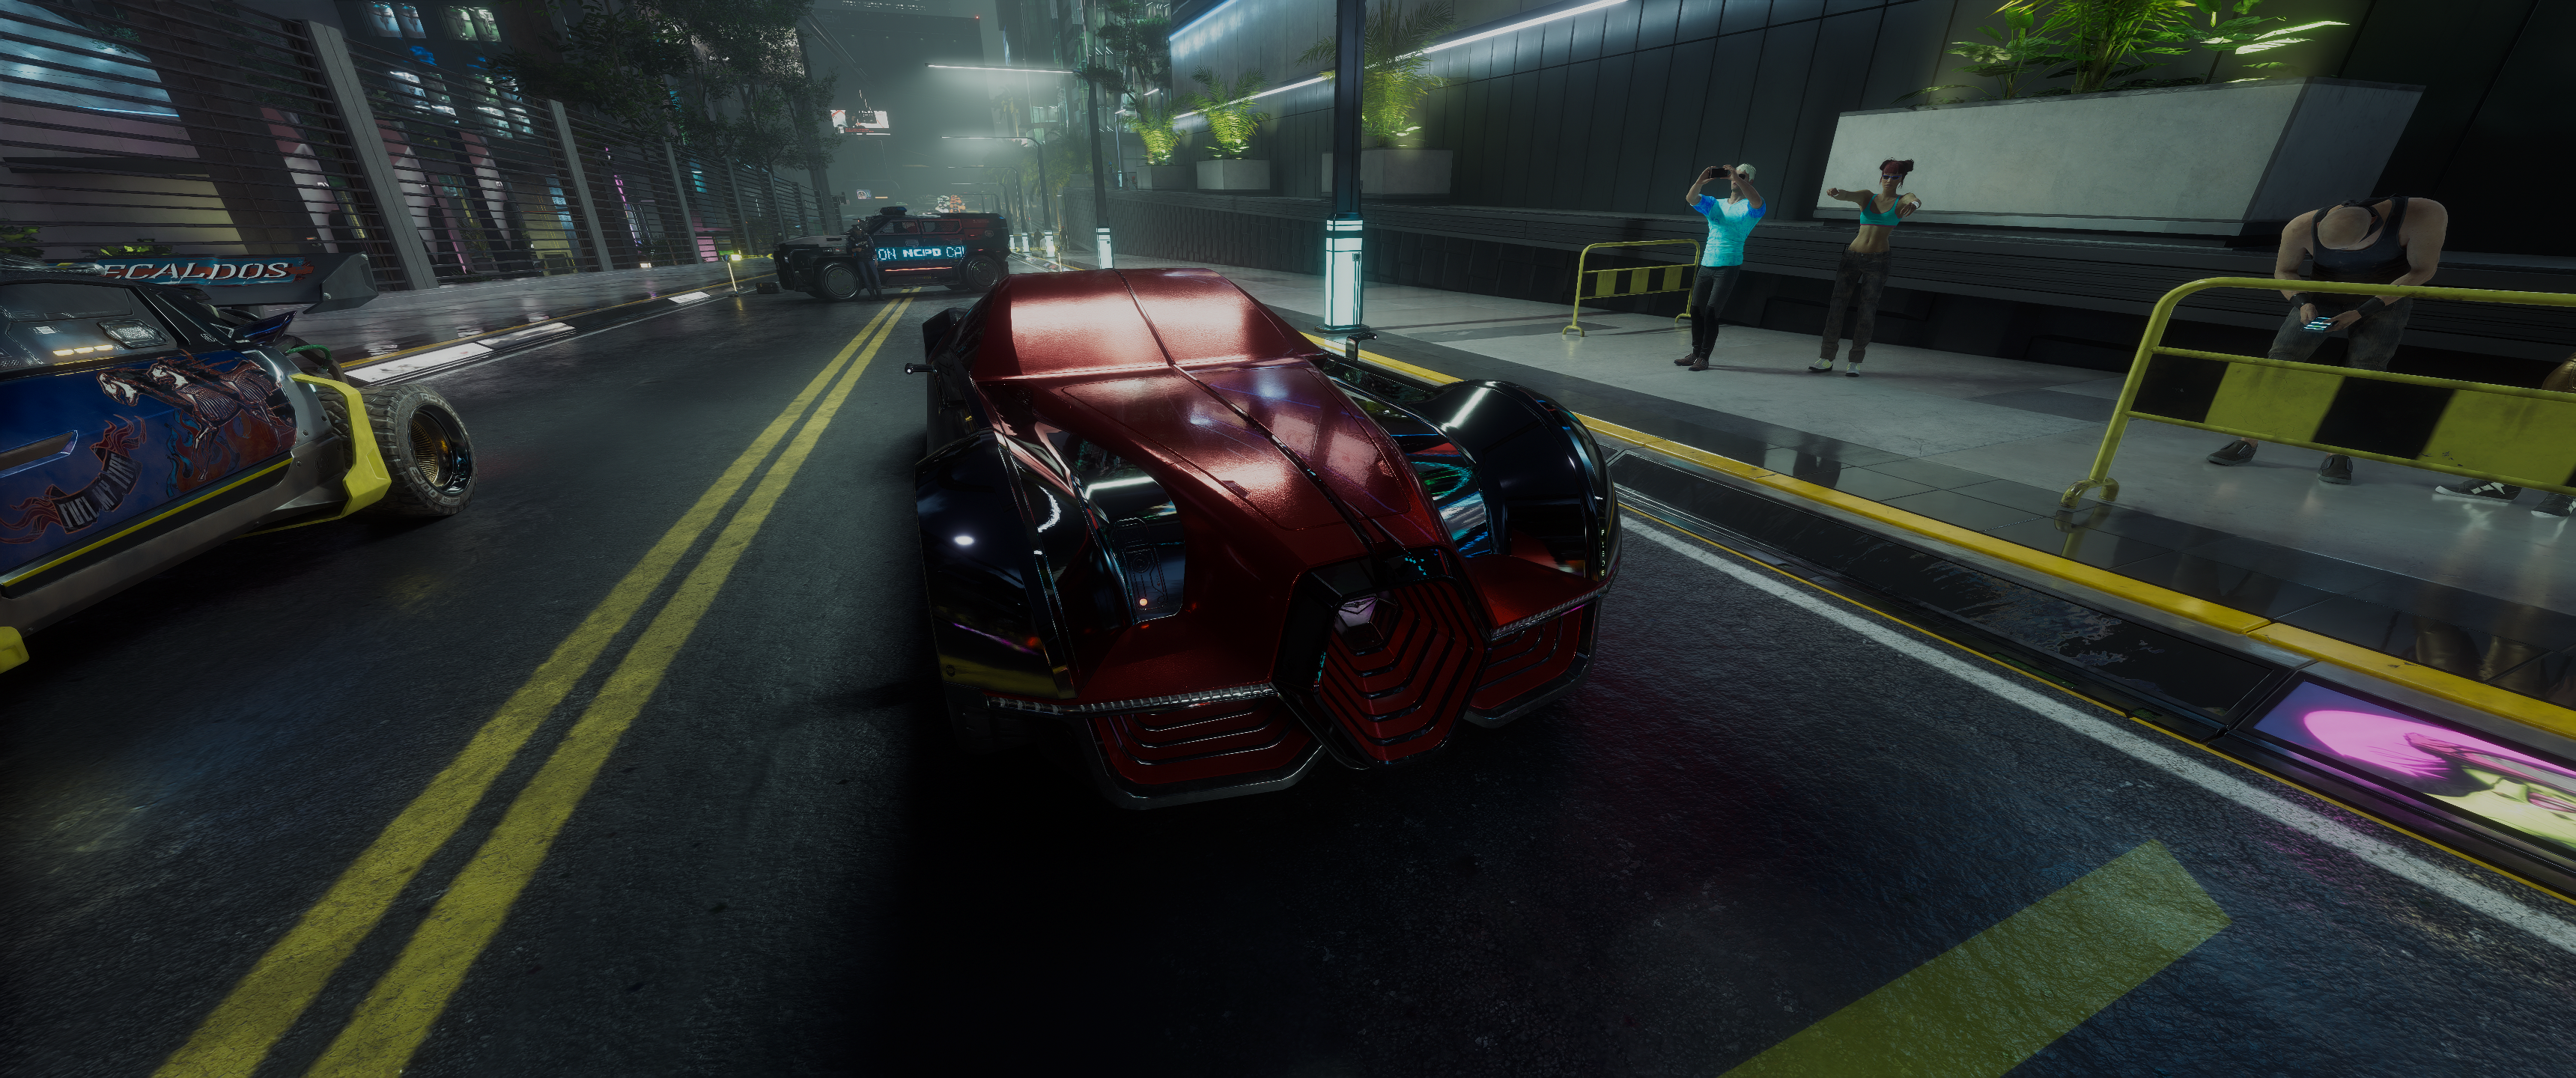 Game Photography Car CD Projekt RED Screen Shot Video Game Art Vehicle Frontal View Road Cyberpunk 2 3440x1440